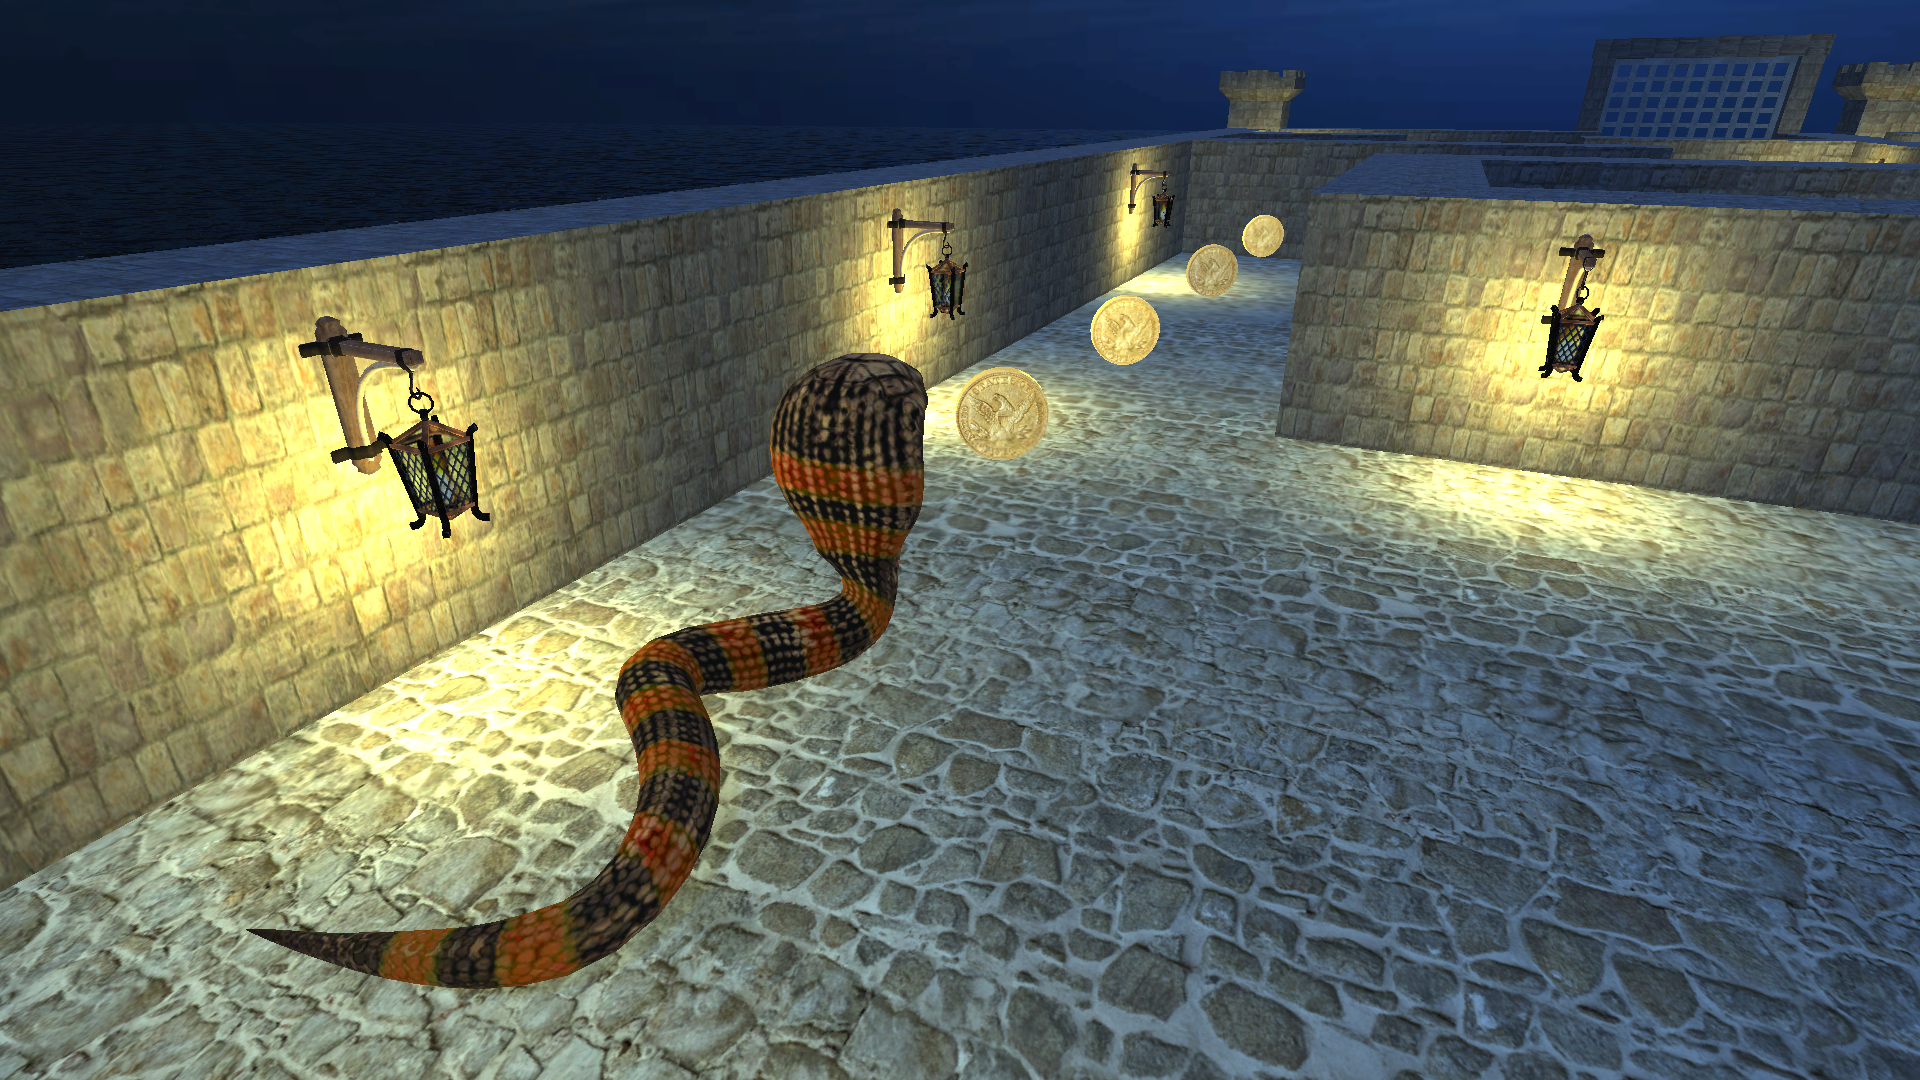 Snake on a pool android iOS-TapTap